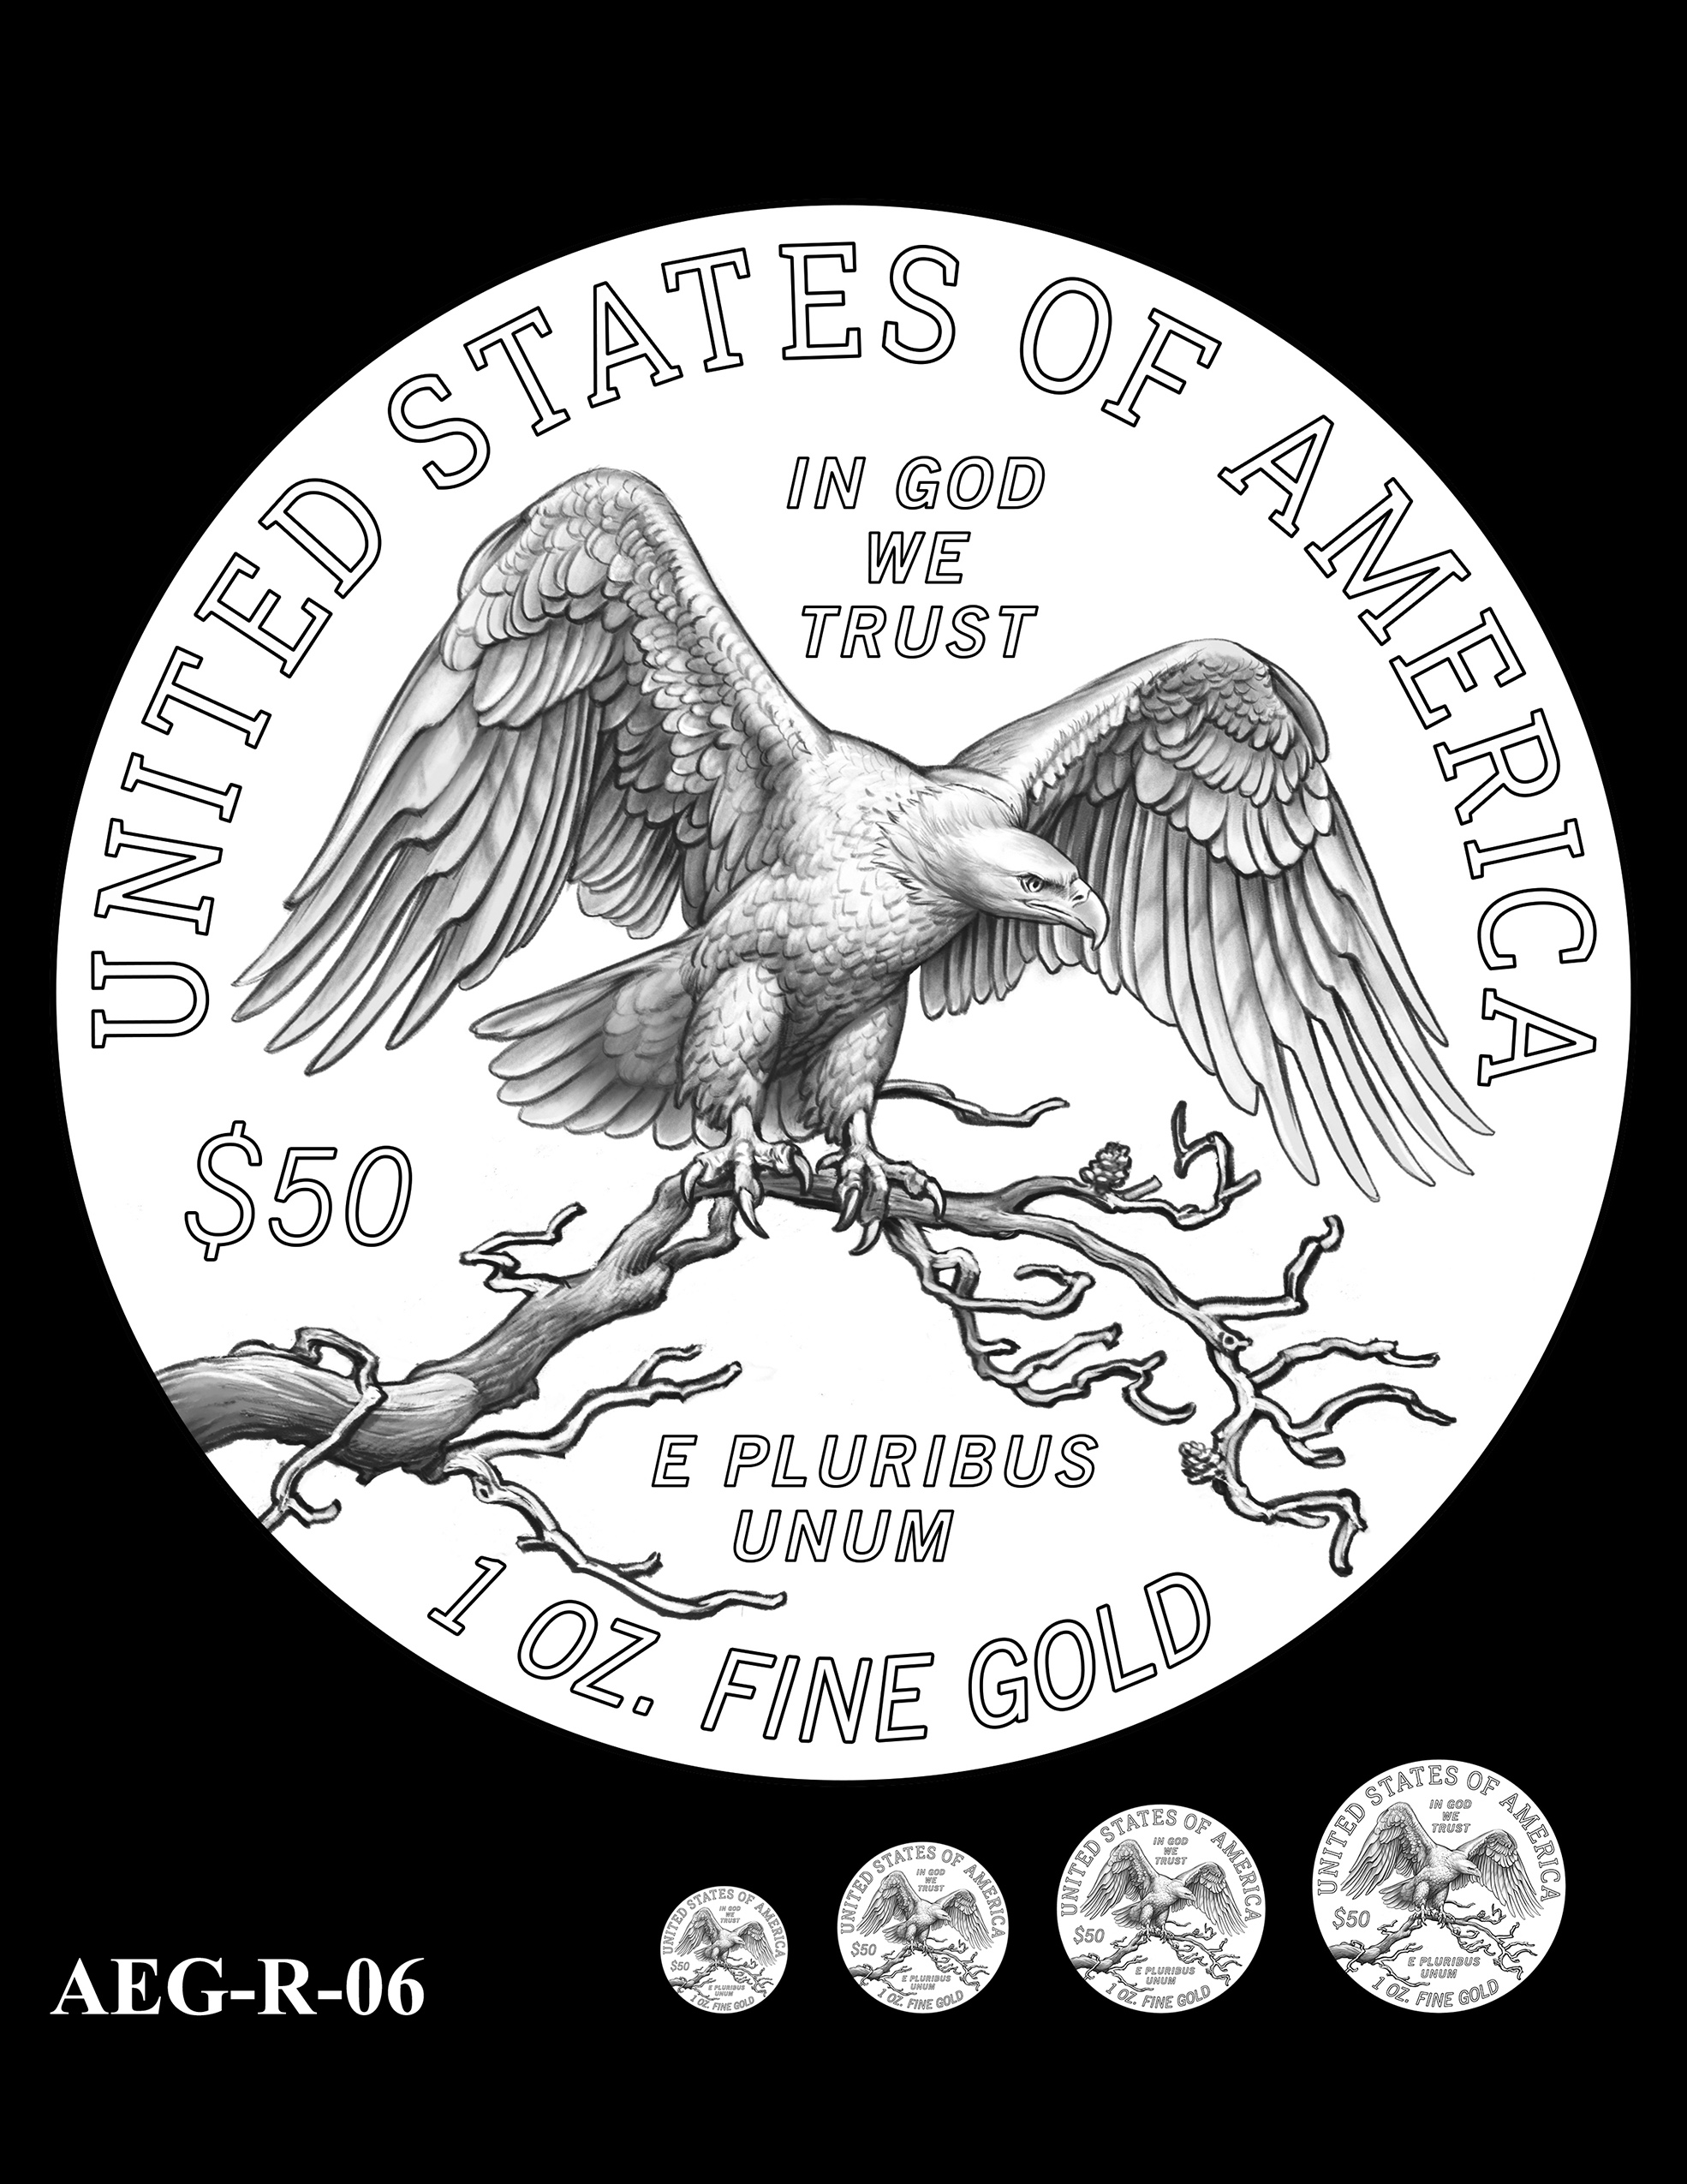 AEG-R-06 -- American Eagle Proof and Bullion Gold Coin - Reverse